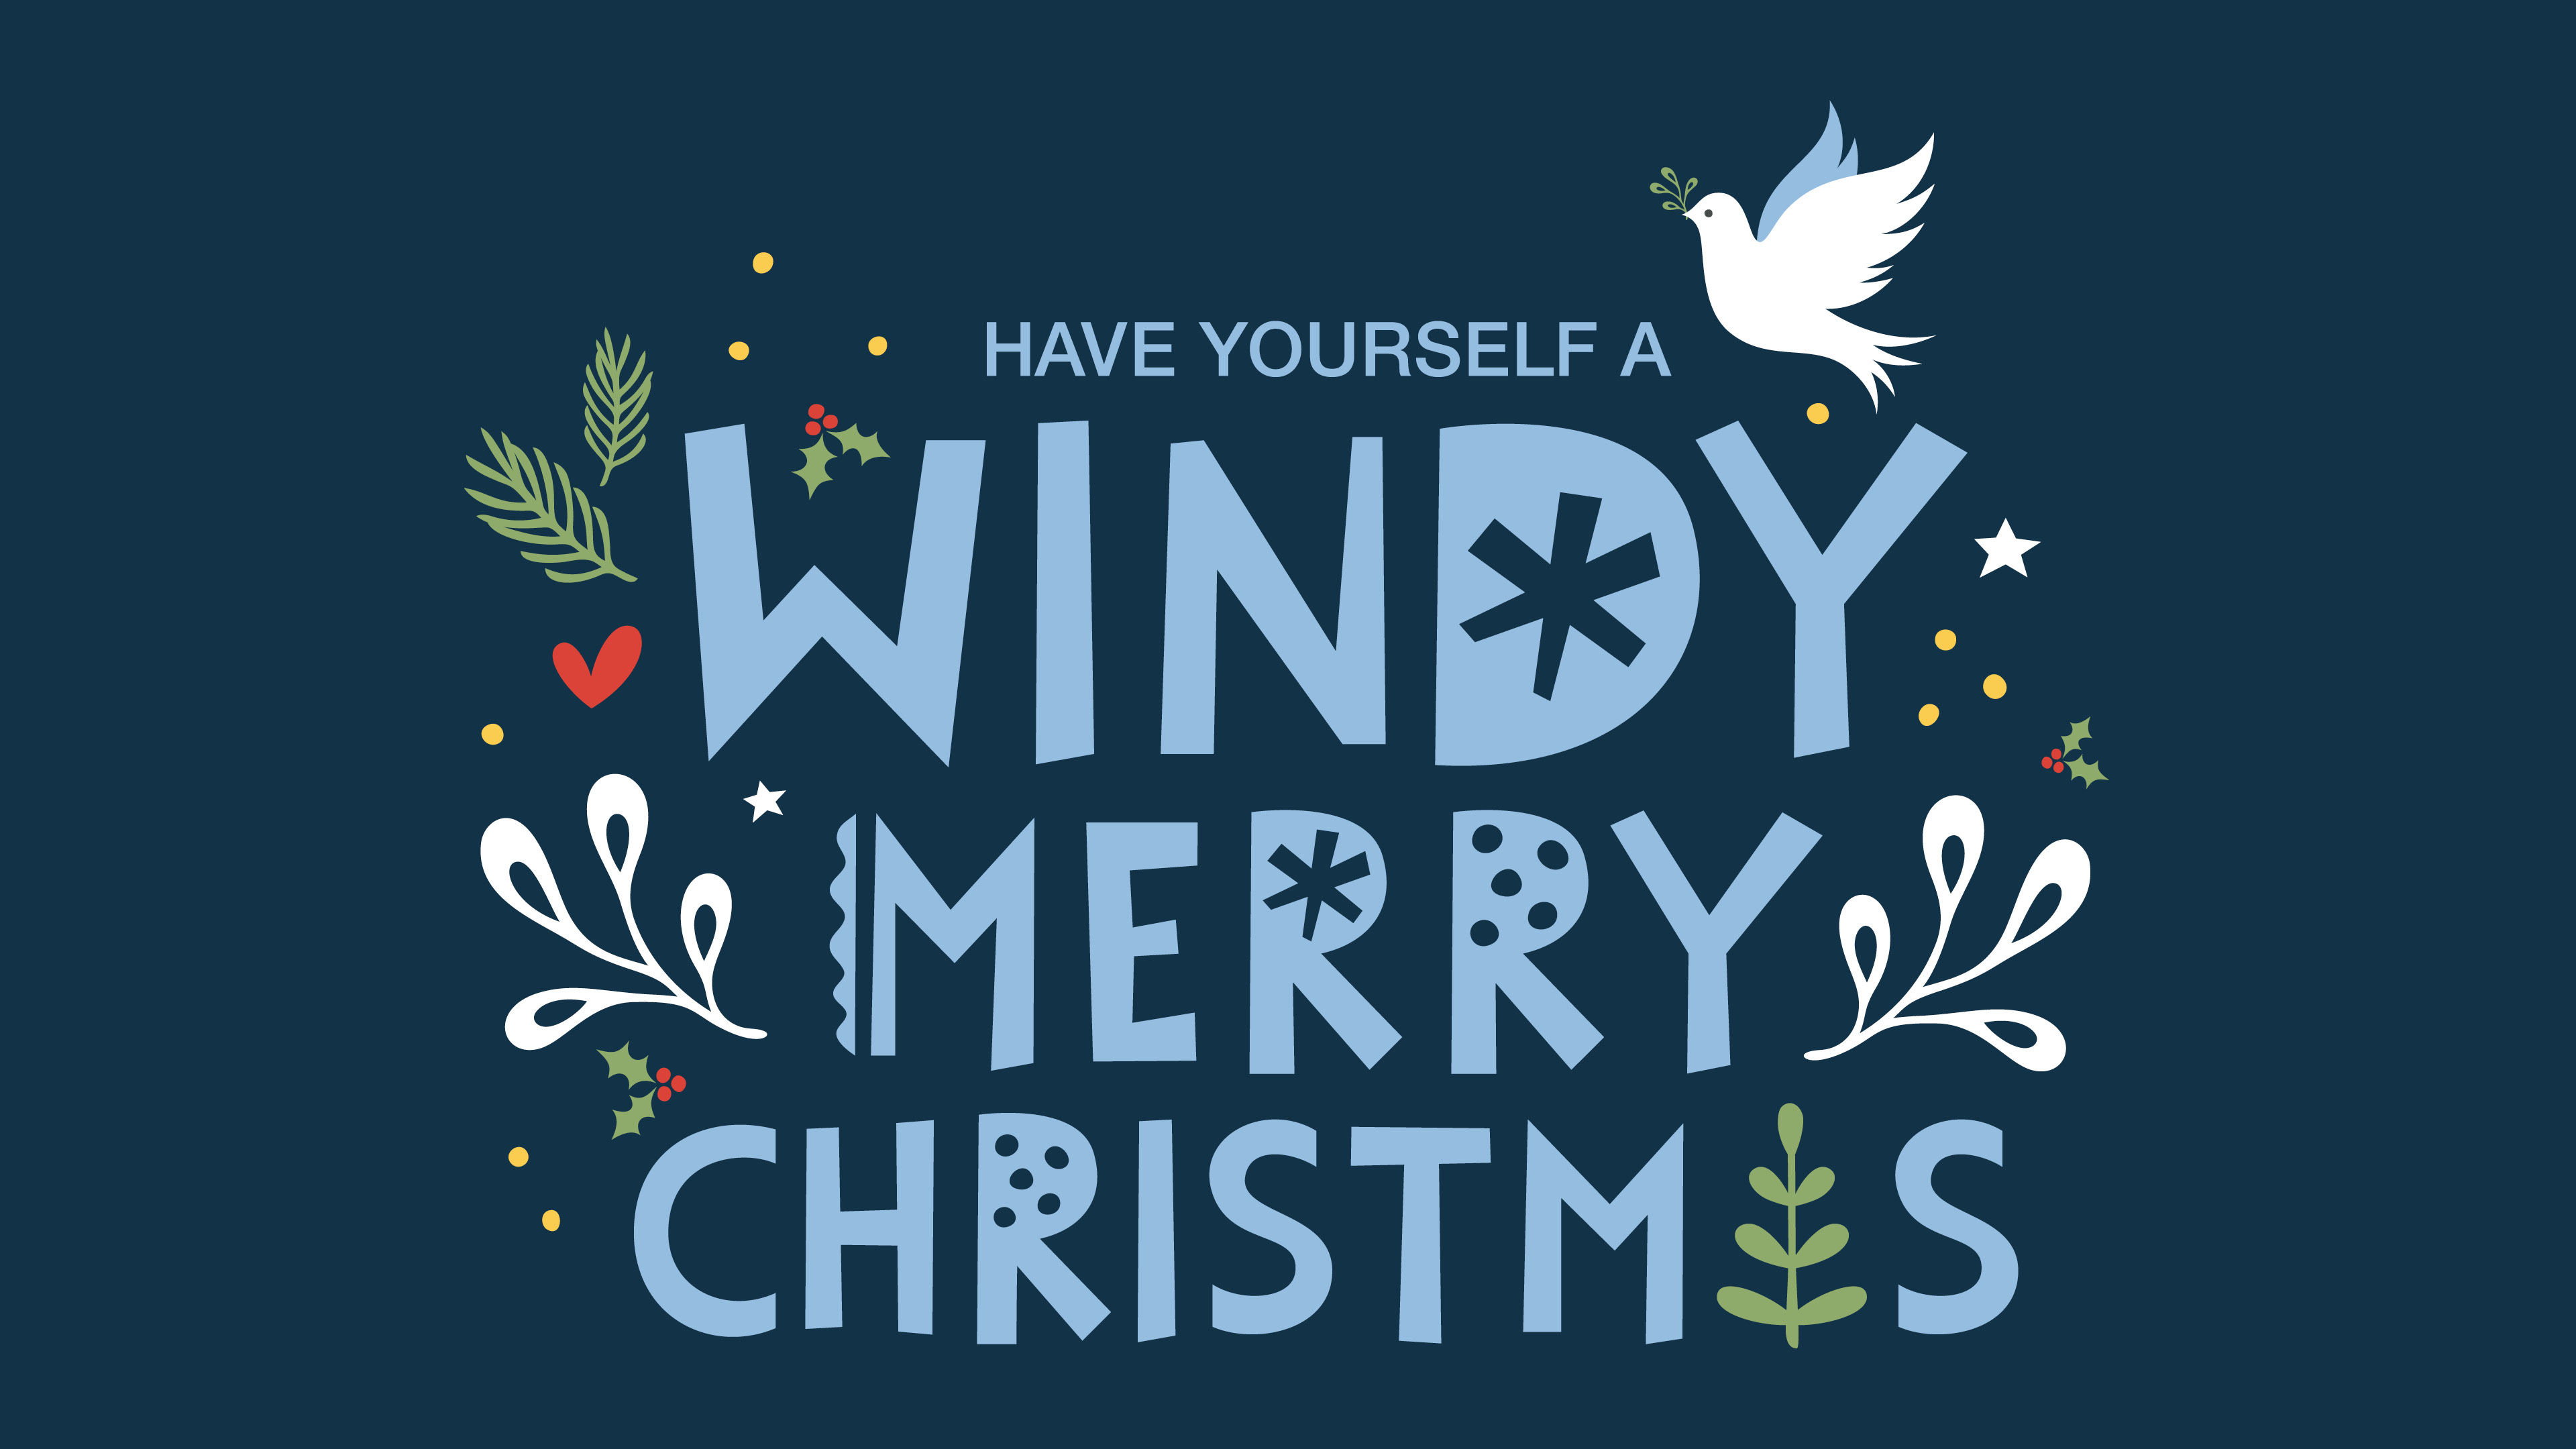 Have Yourself a Windy Merry Christmas